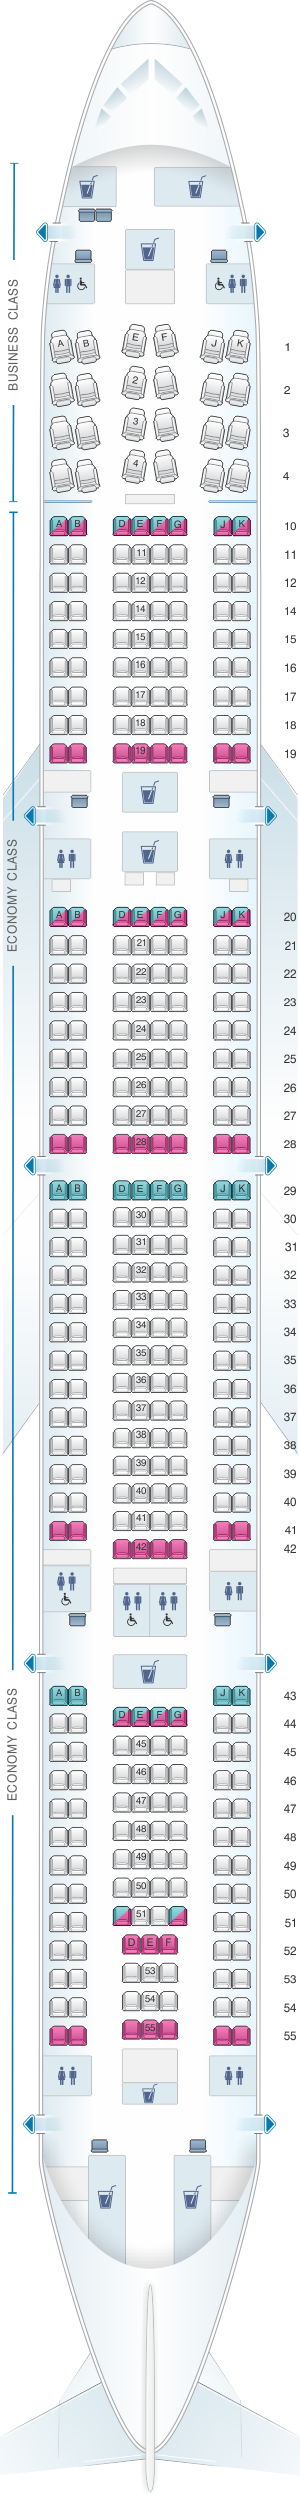 Seat Map Qatar Airlines Airbus A340 600 1 